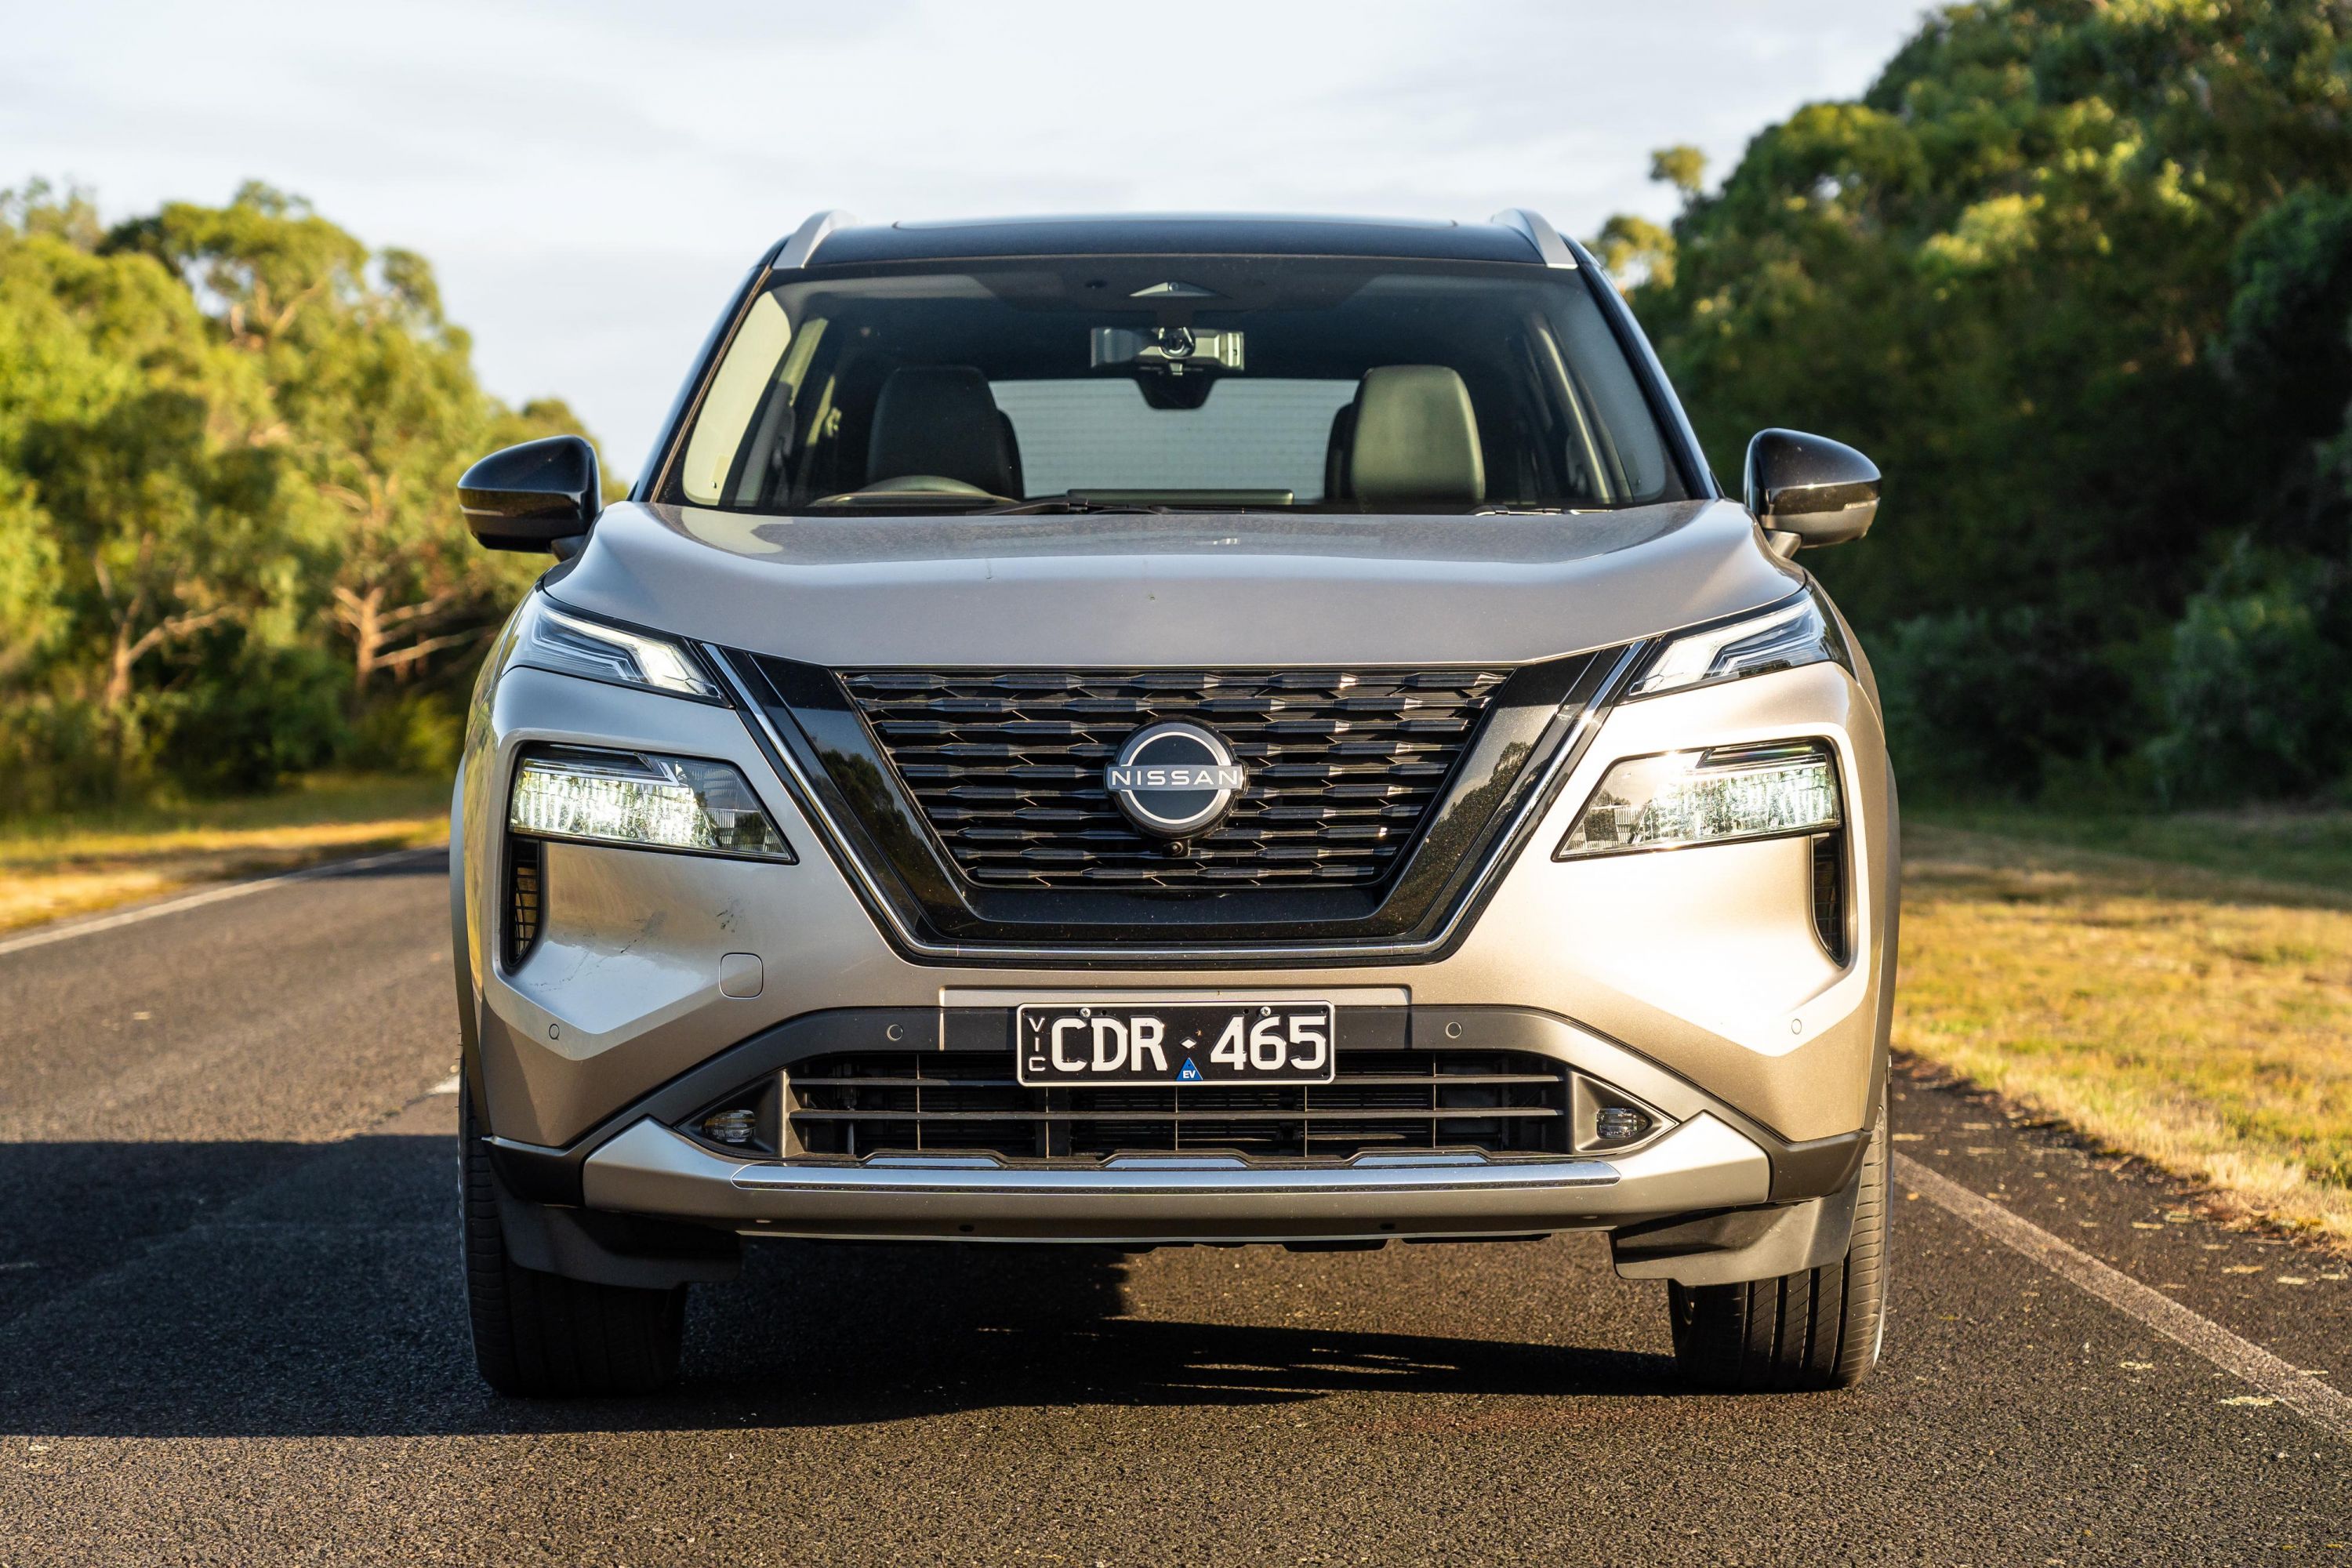 2023 Nissan X-Trail ST-L e-Power hybrid joins the local line-up - Drive